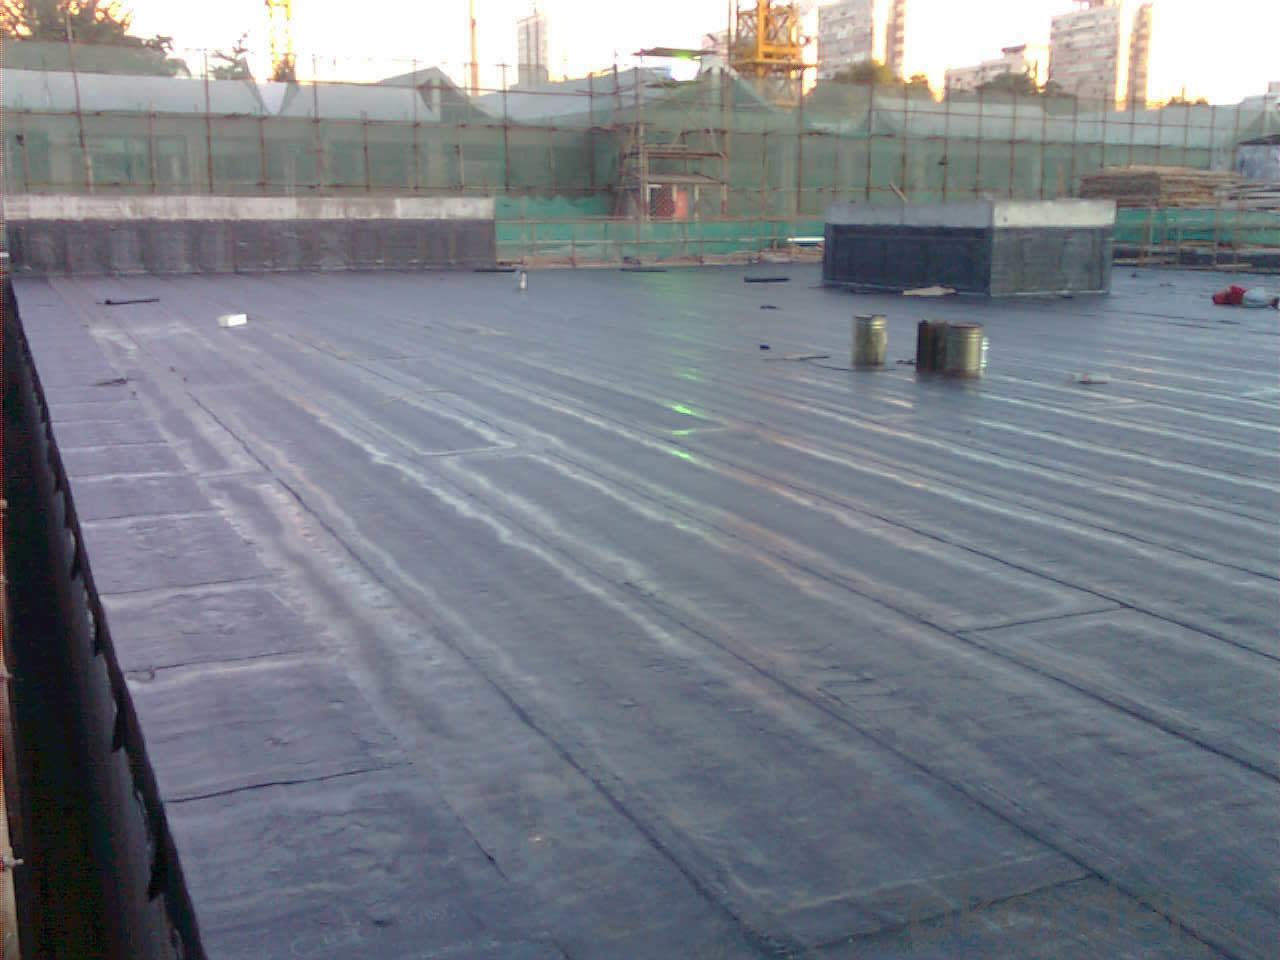 EPDM Coiled Rubber Waterproof Membrane with 1.5mm Thickness